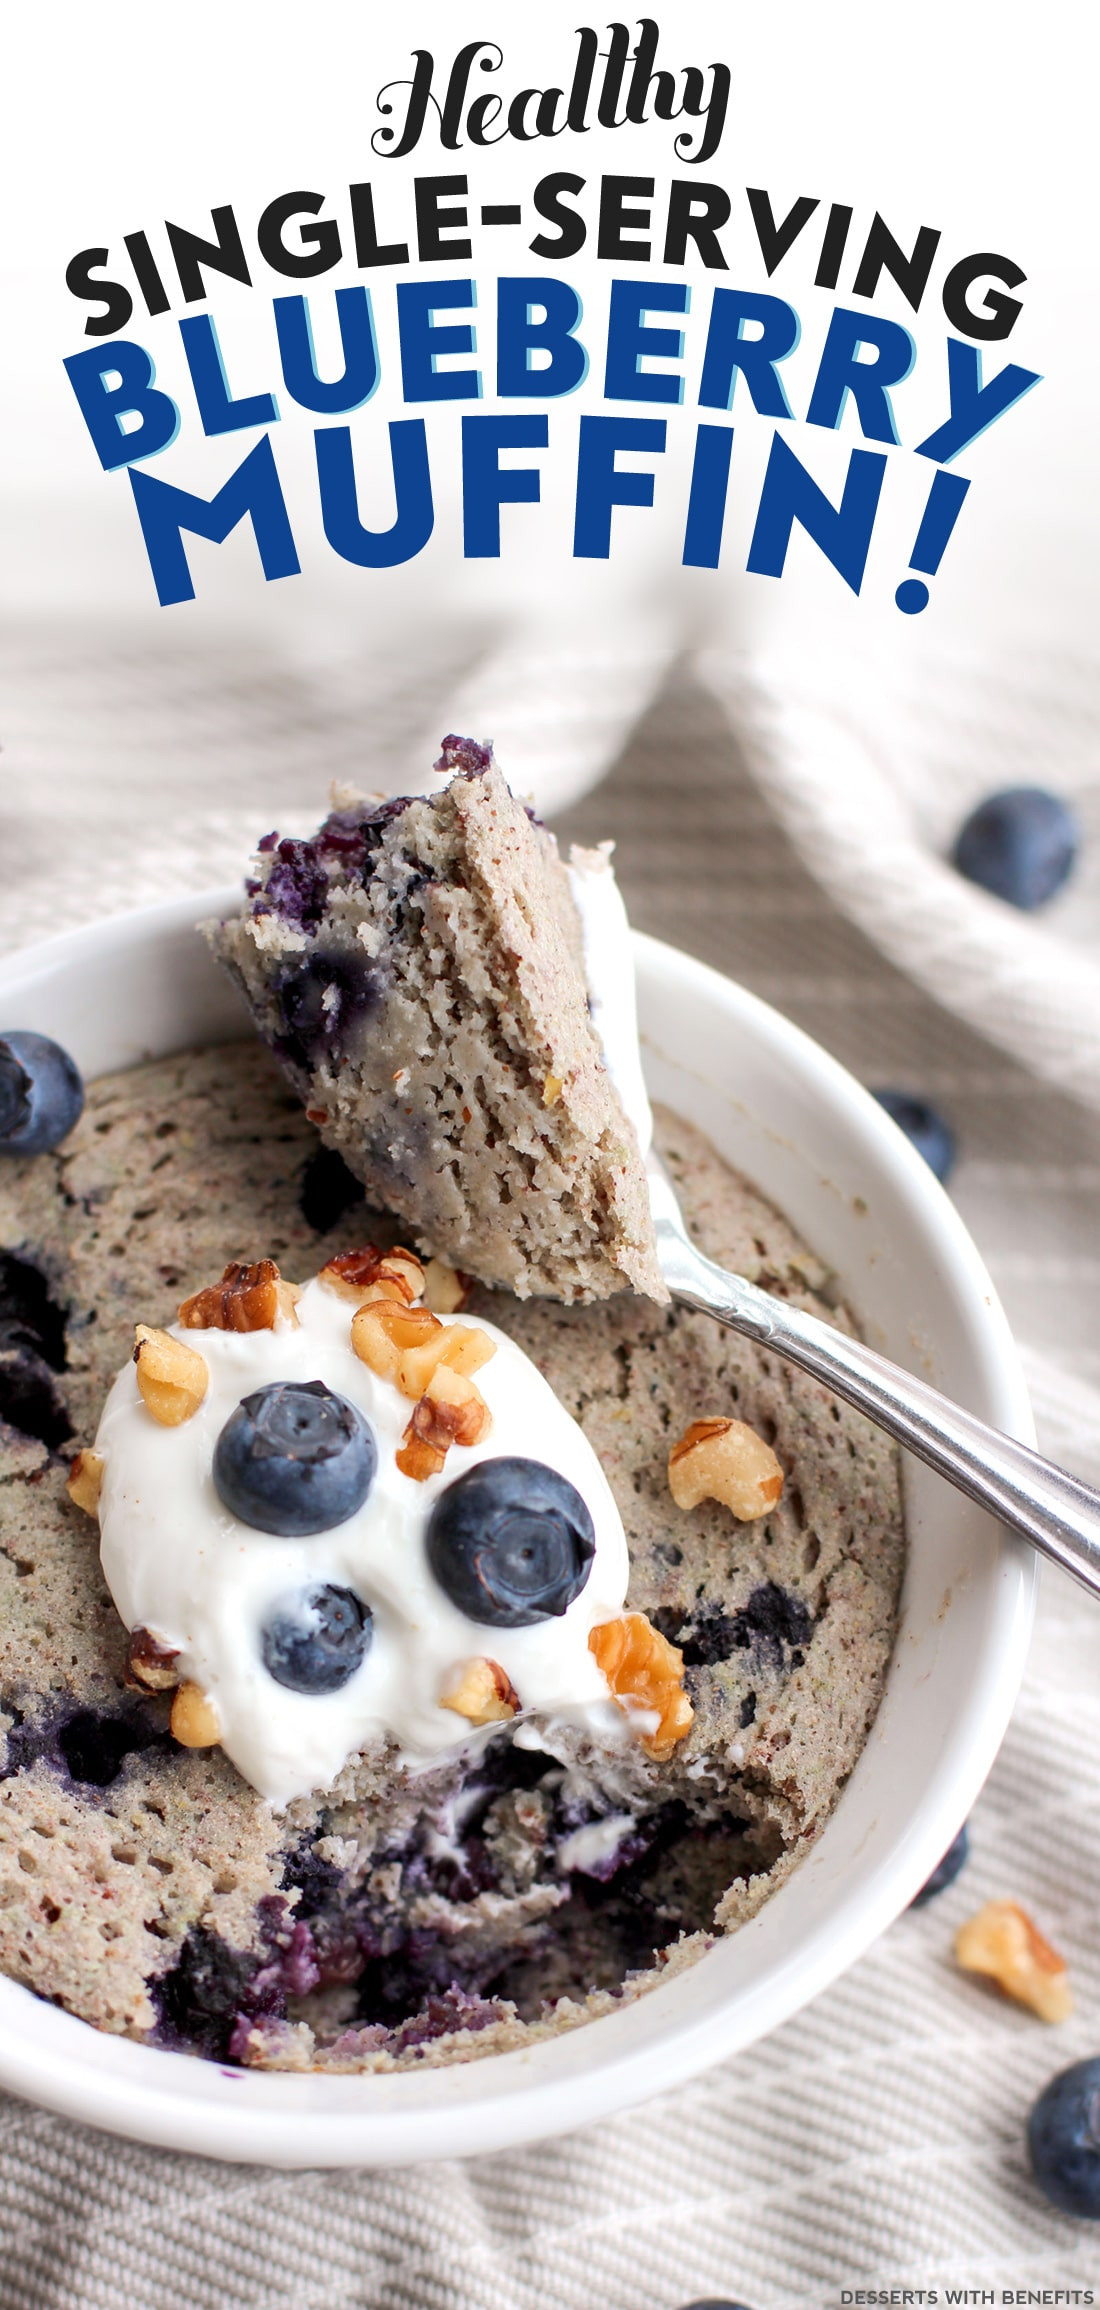 Single Serving Microwave Desserts
 Healthy Single Serving Blueberry Microwave Muffin